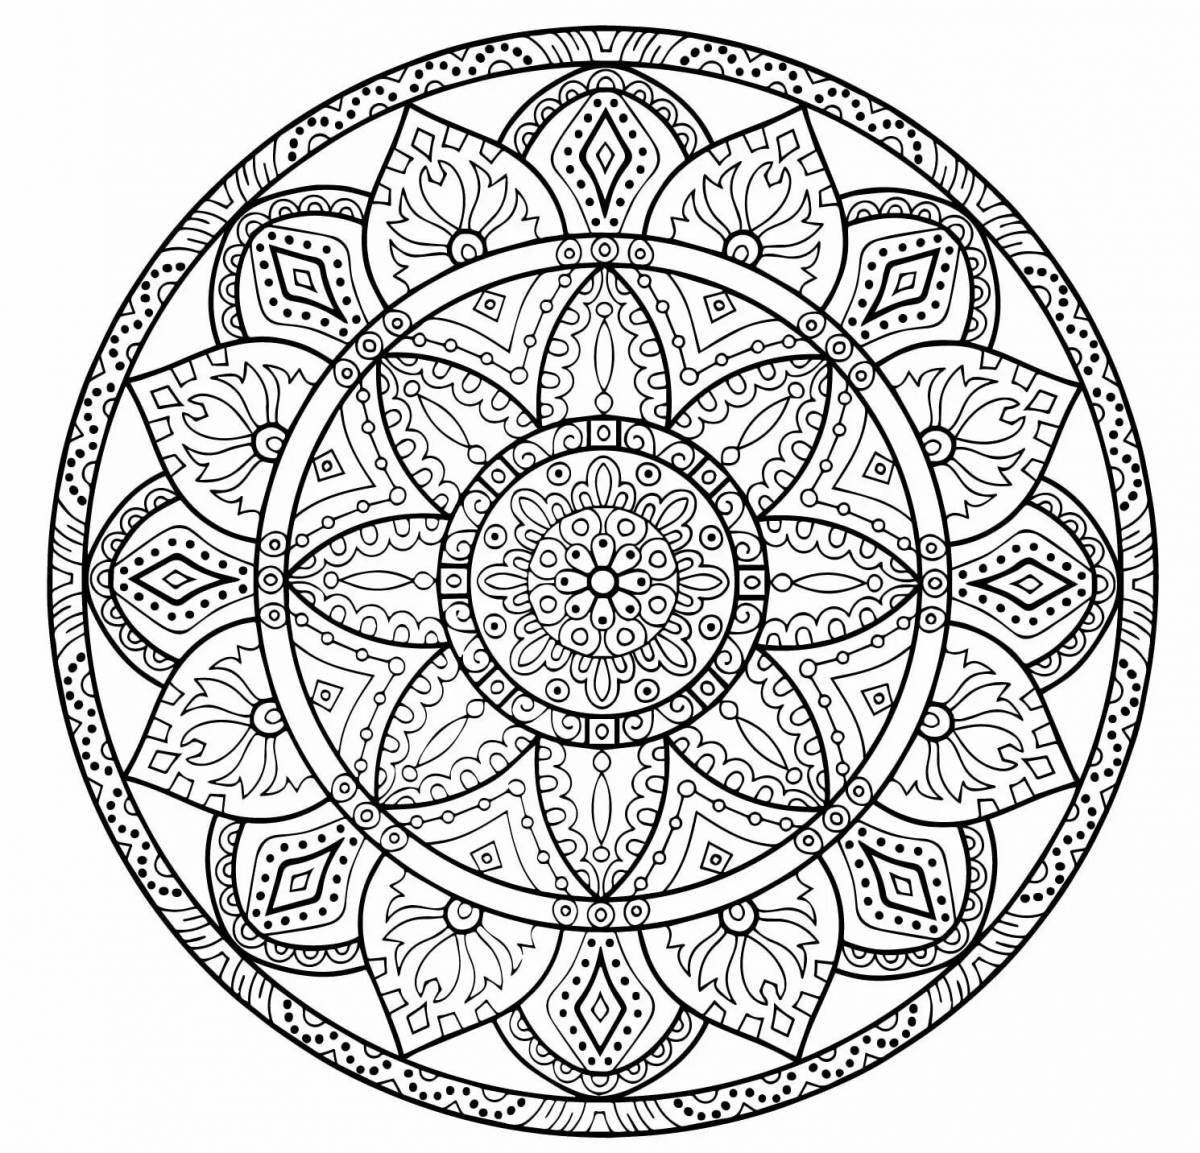 Awesome mandala coloring page for money